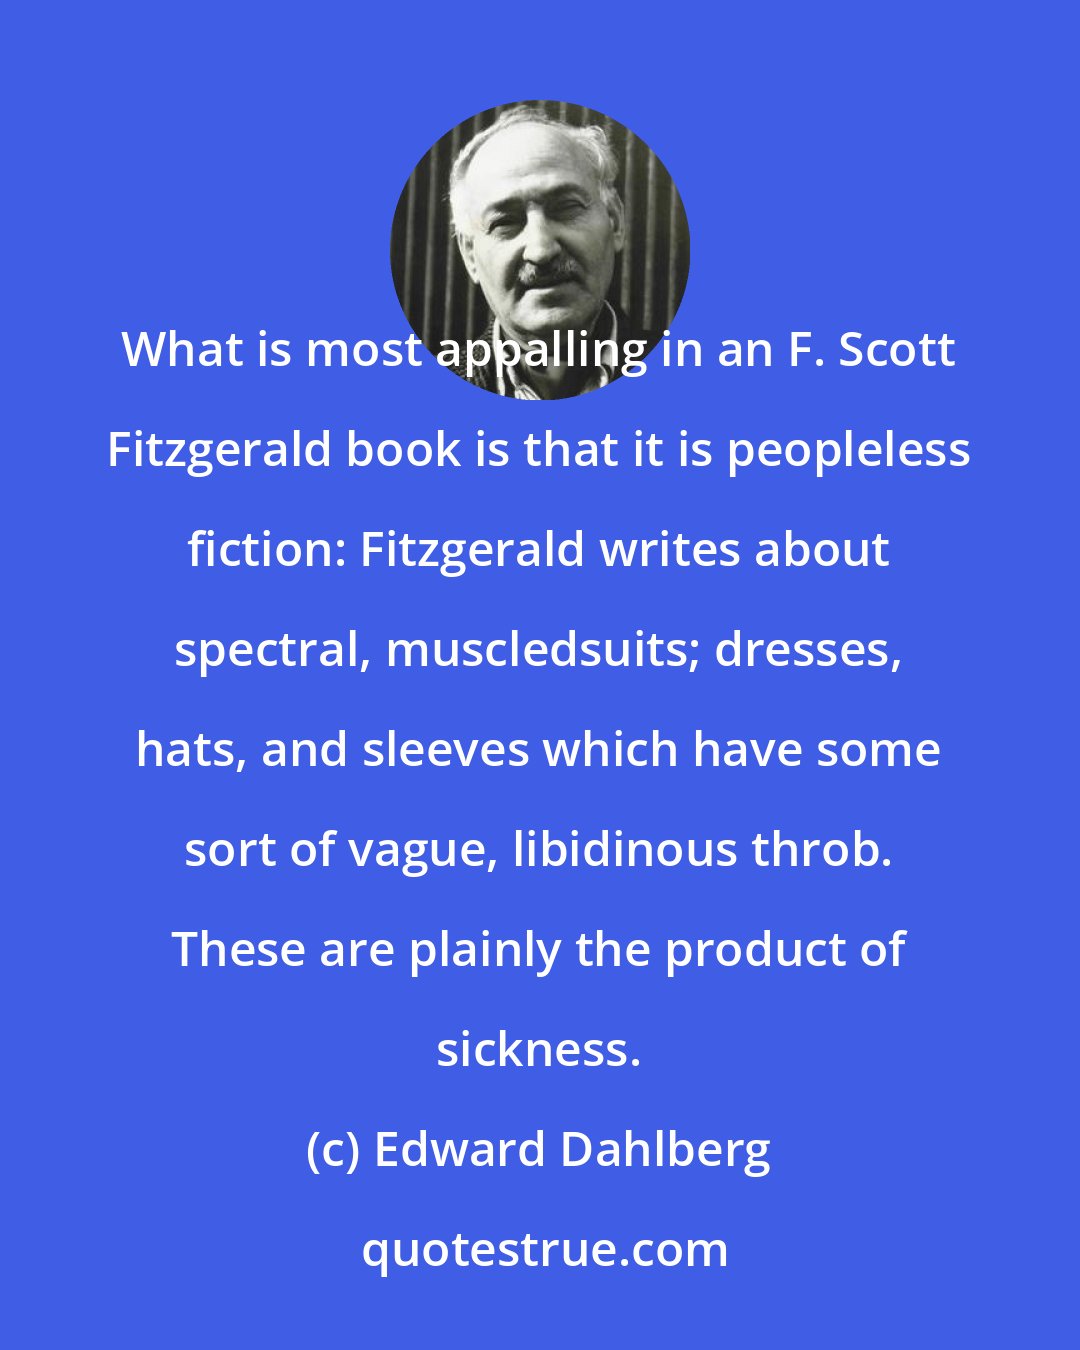 Edward Dahlberg: What is most appalling in an F. Scott Fitzgerald book is that it is peopleless fiction: Fitzgerald writes about spectral, muscledsuits; dresses, hats, and sleeves which have some sort of vague, libidinous throb. These are plainly the product of sickness.